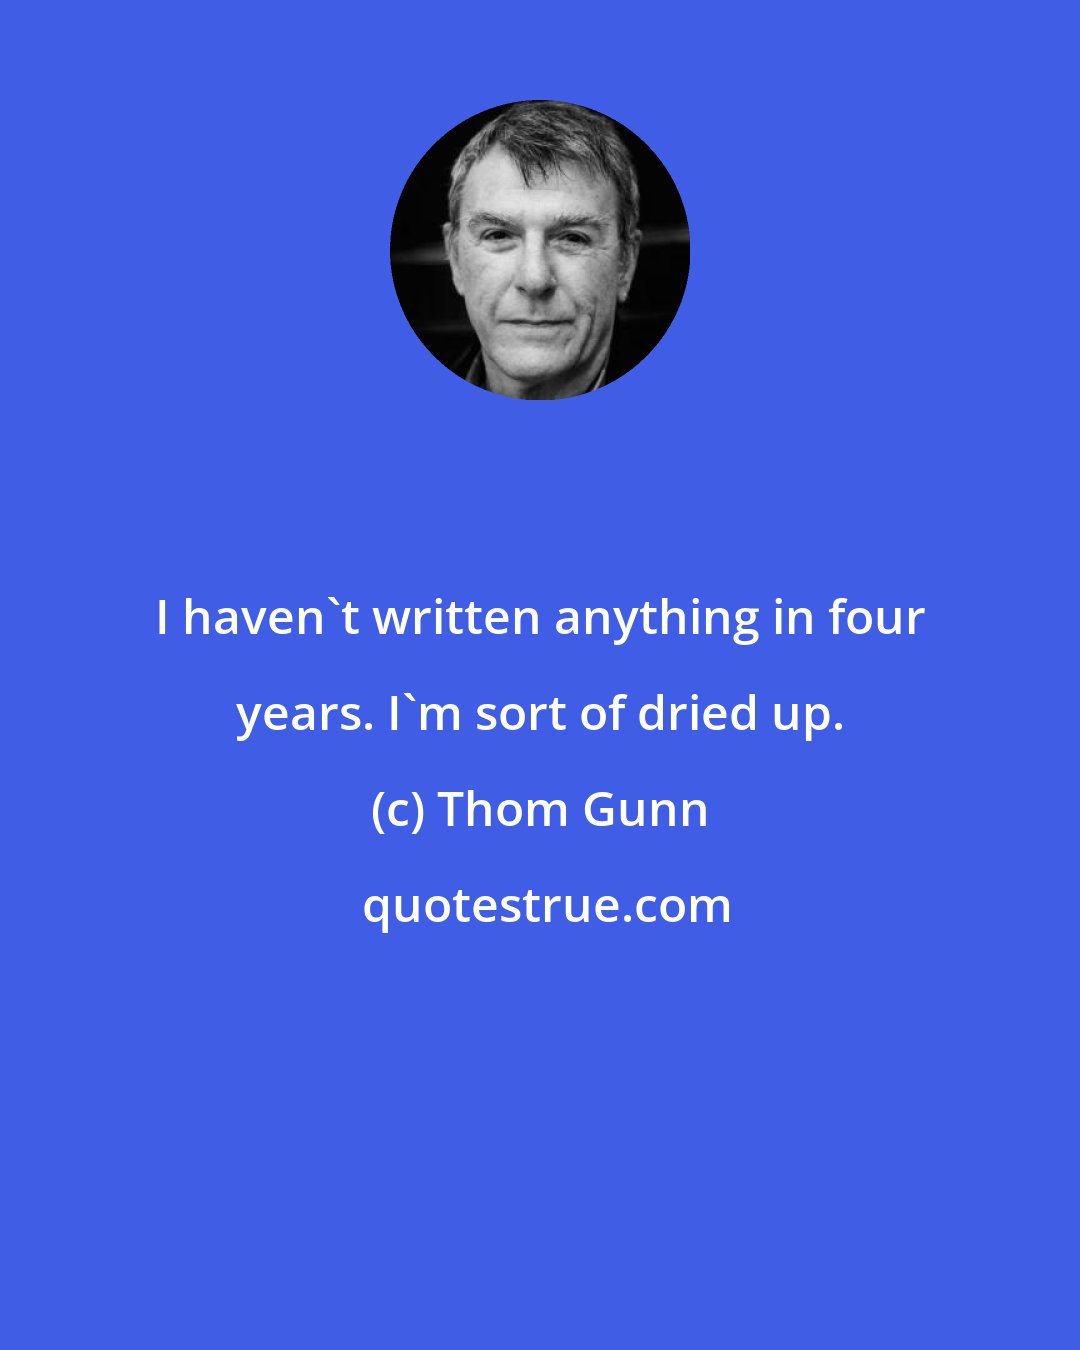 Thom Gunn: I haven't written anything in four years. I'm sort of dried up.